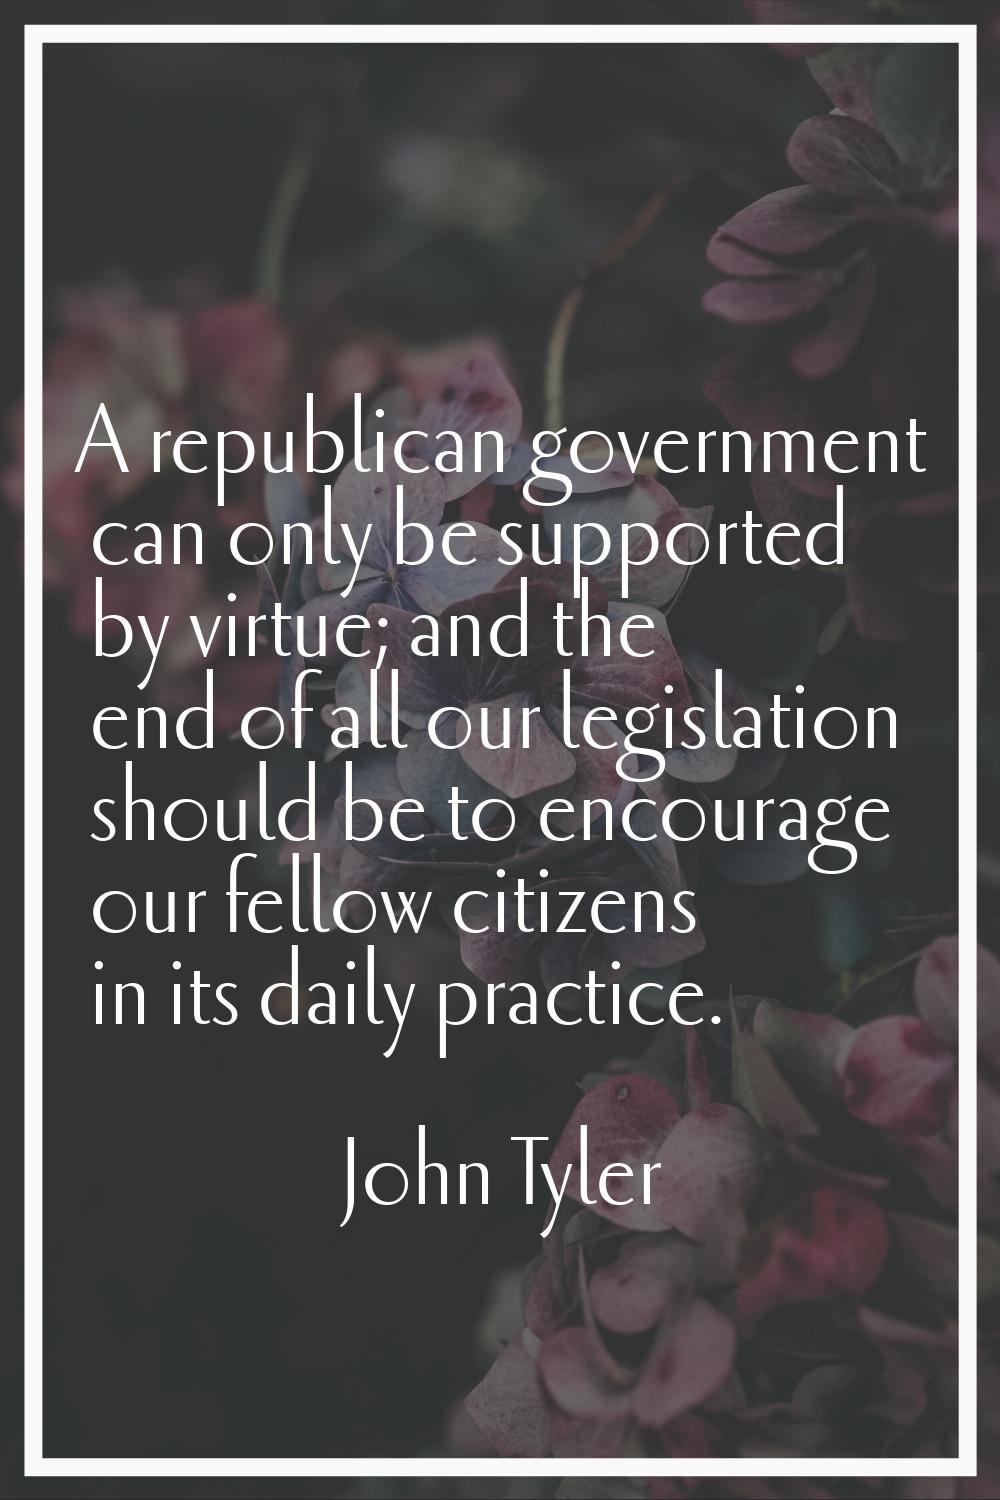 A republican government can only be supported by virtue; and the end of all our legislation should 